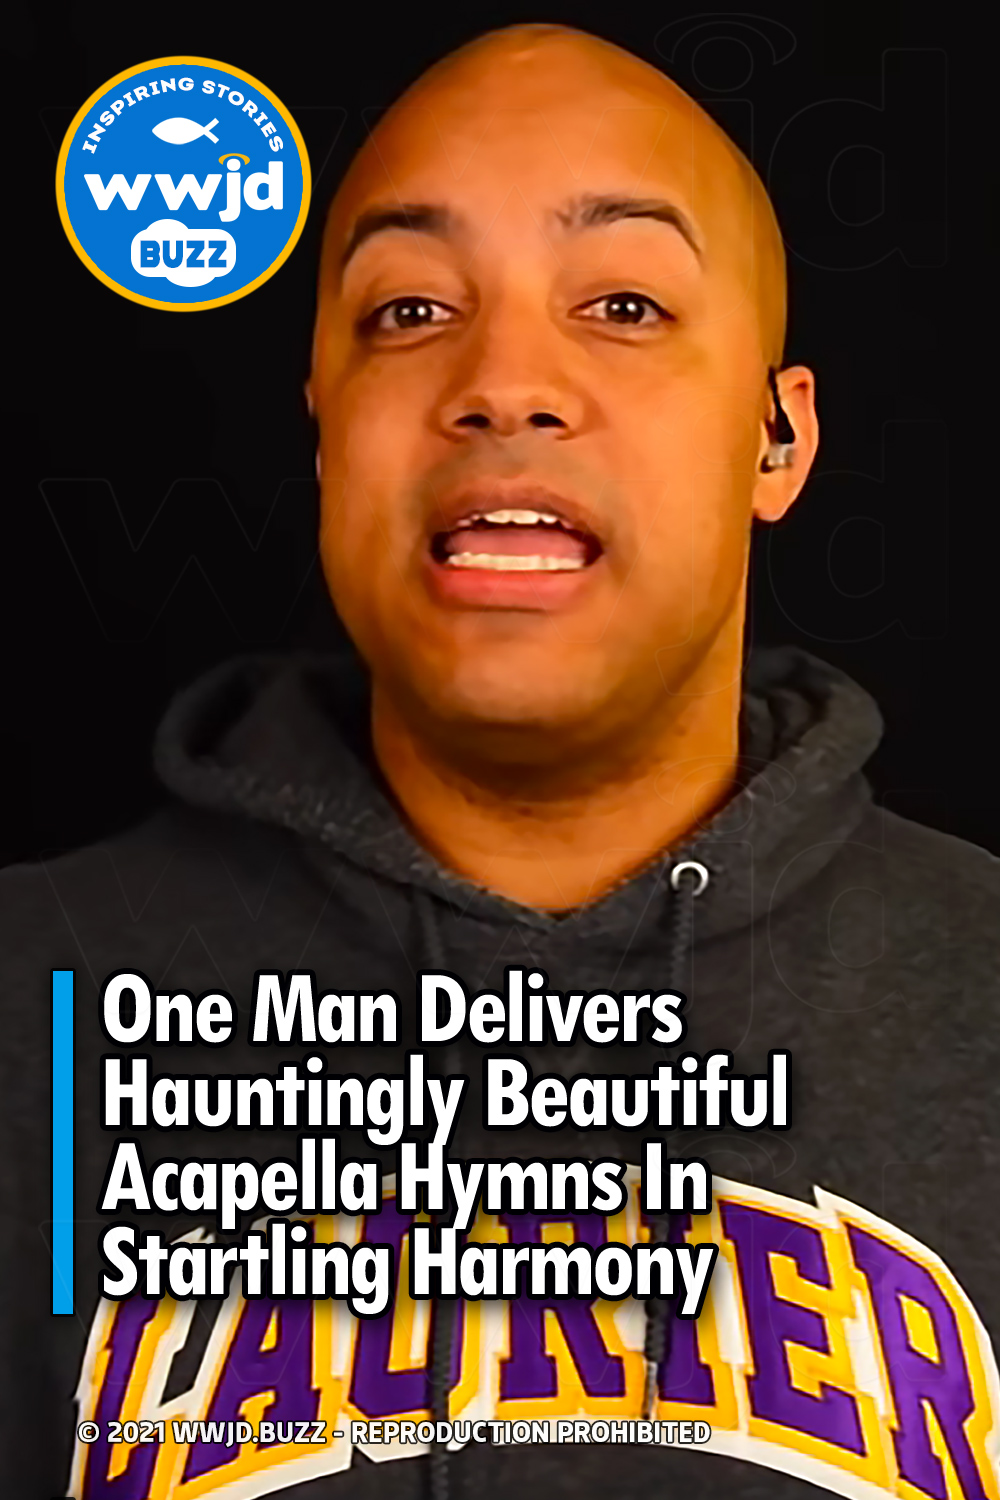 One Man Delivers Hauntingly Beautiful Acapella Hymns In Startling Harmony